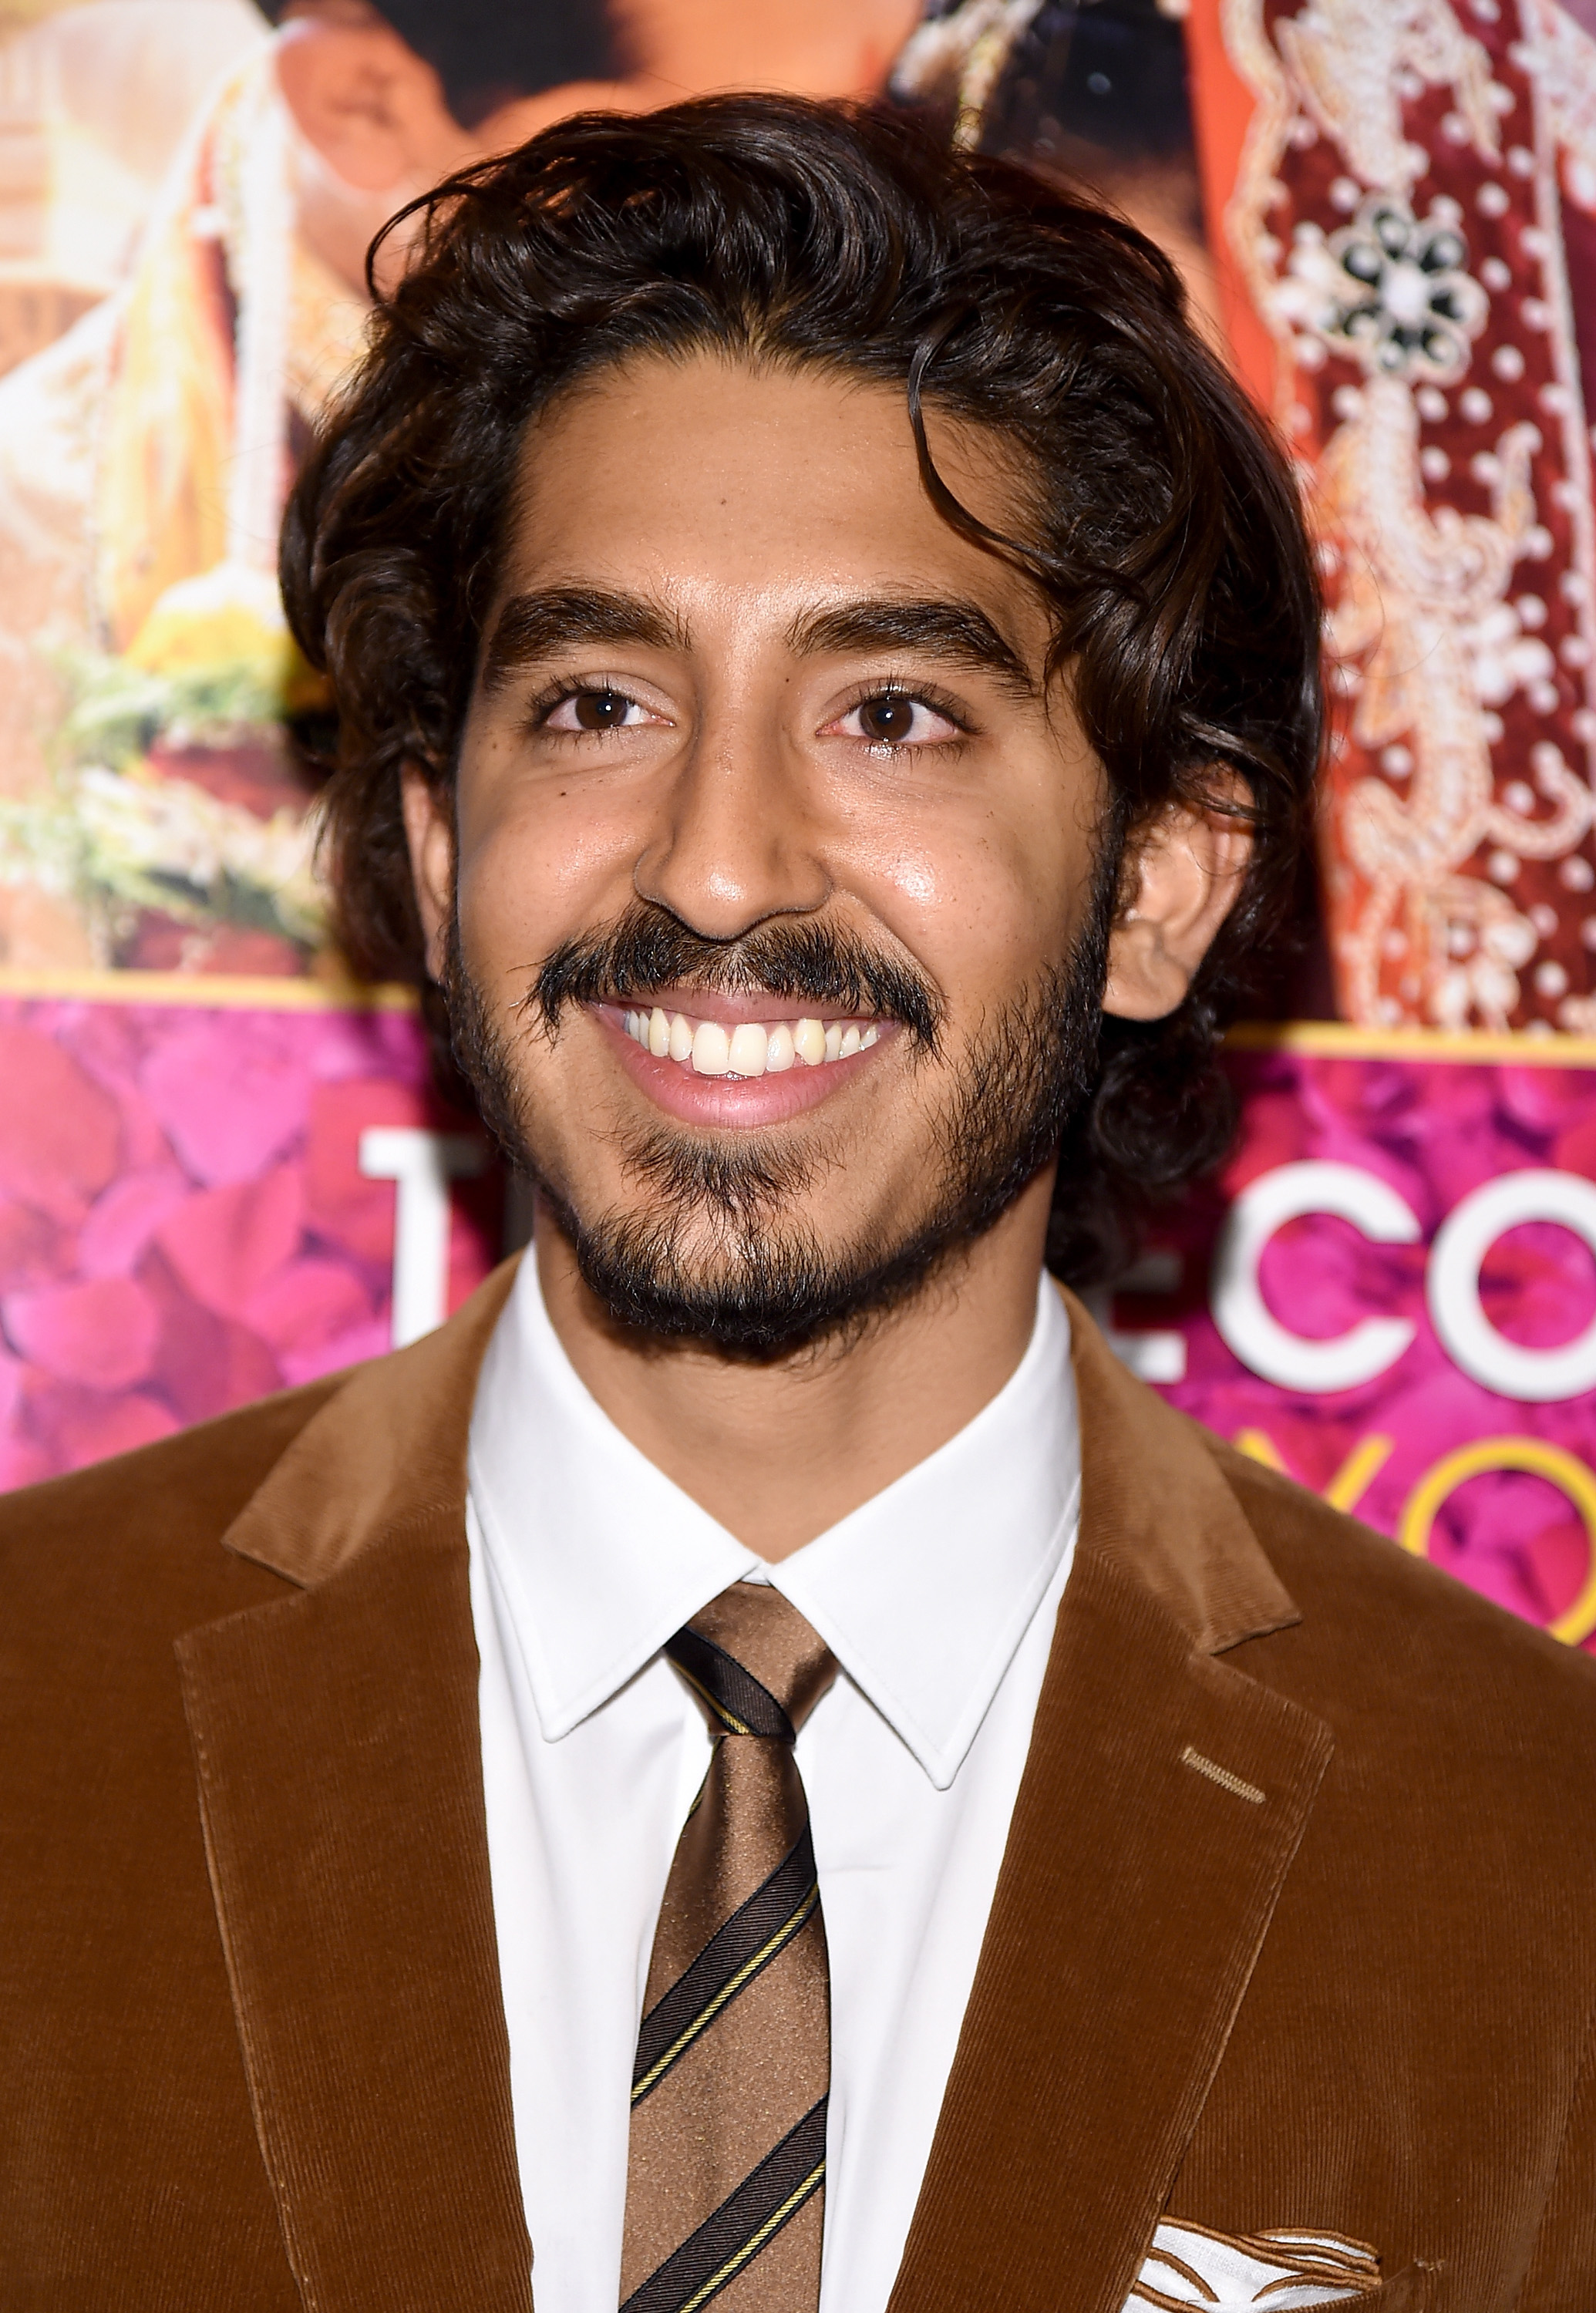 Actor Dev Patel attends "The Second Best Exotic Marigold Hotel" New York Premiere on Mar. 3, 2015 in New York City. (Michael Loccisano—FilmMagic)